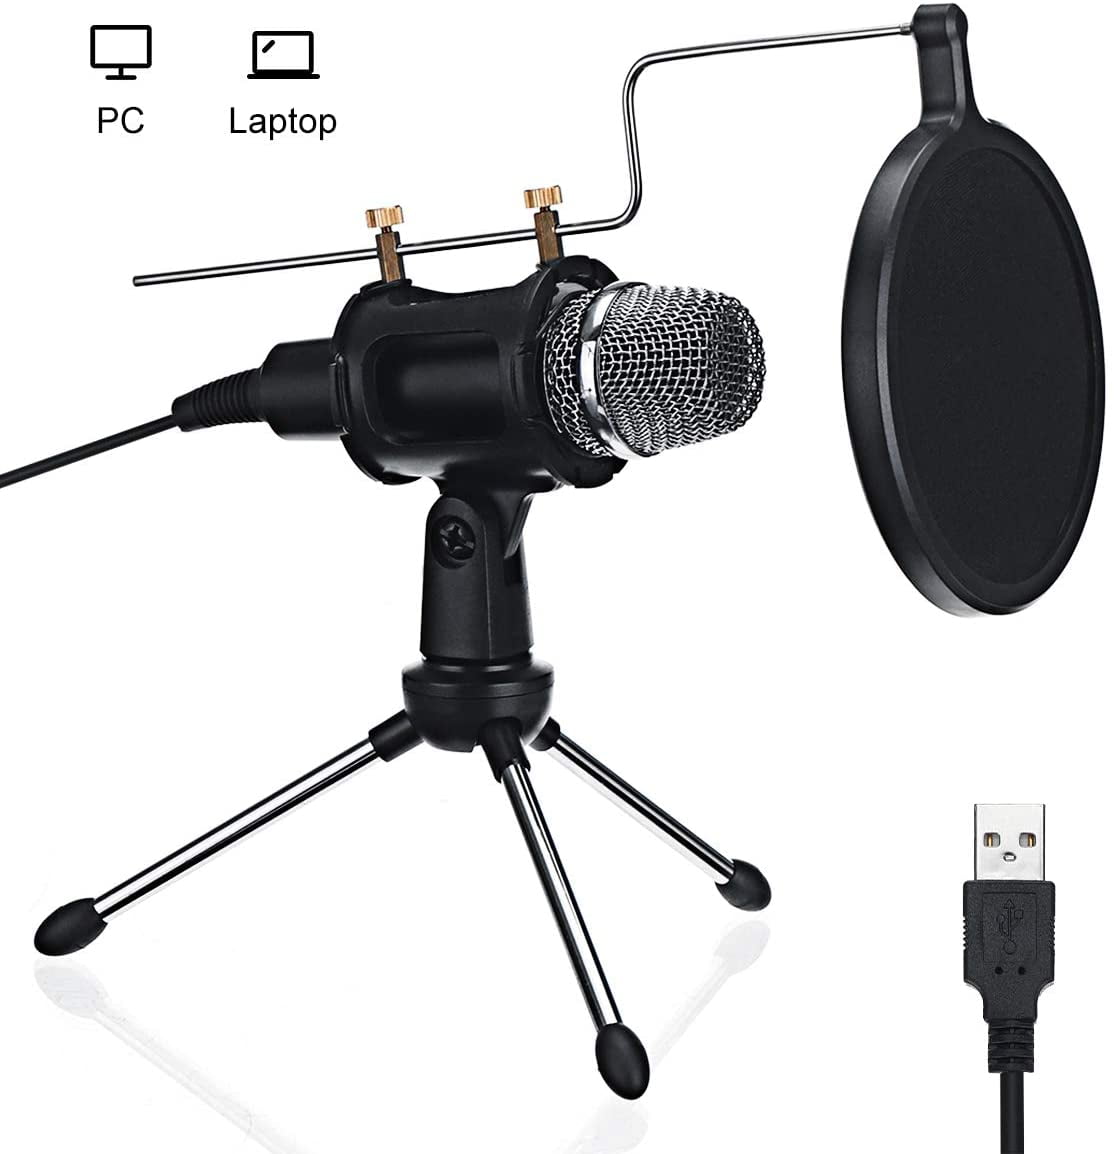 NASUM Desktop Podcast Microphone with Adjustable Metal Tripod Stand Condenser Recording Microphone for Gaming Broadcasting Chatting YouTube,Plug & Play. USB Microphone for Computer 